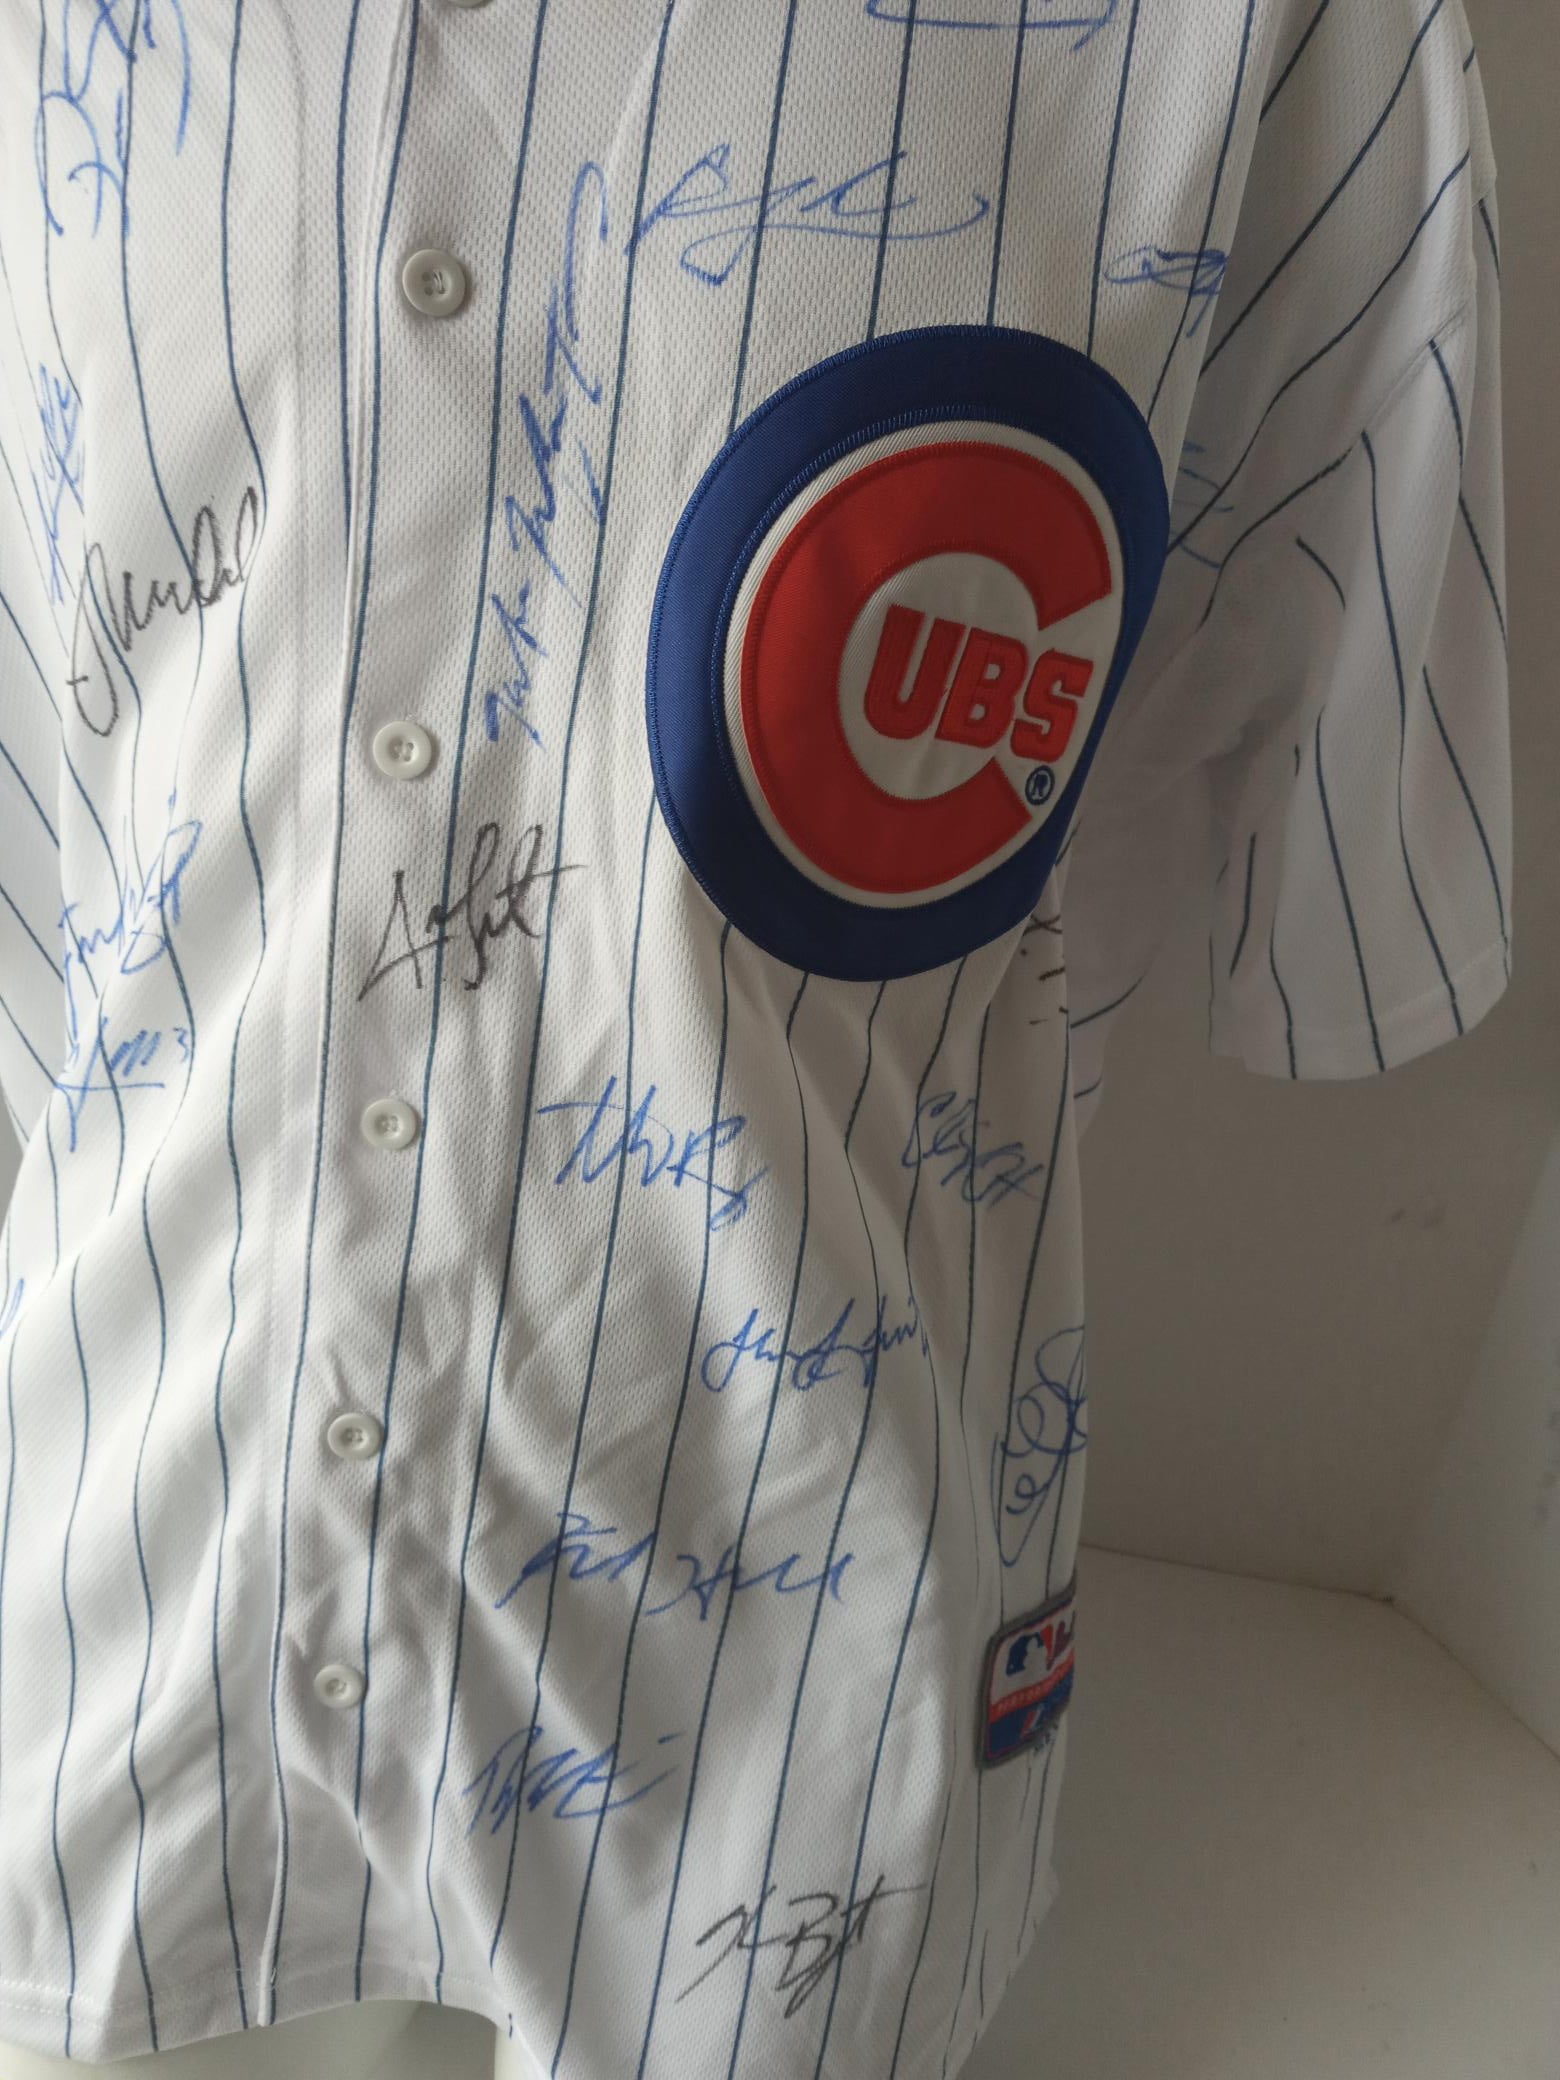 Chicago Cubs world champions Joe Maddon, Anthony Rizzo, Kris Bryant team signed jersey with proof